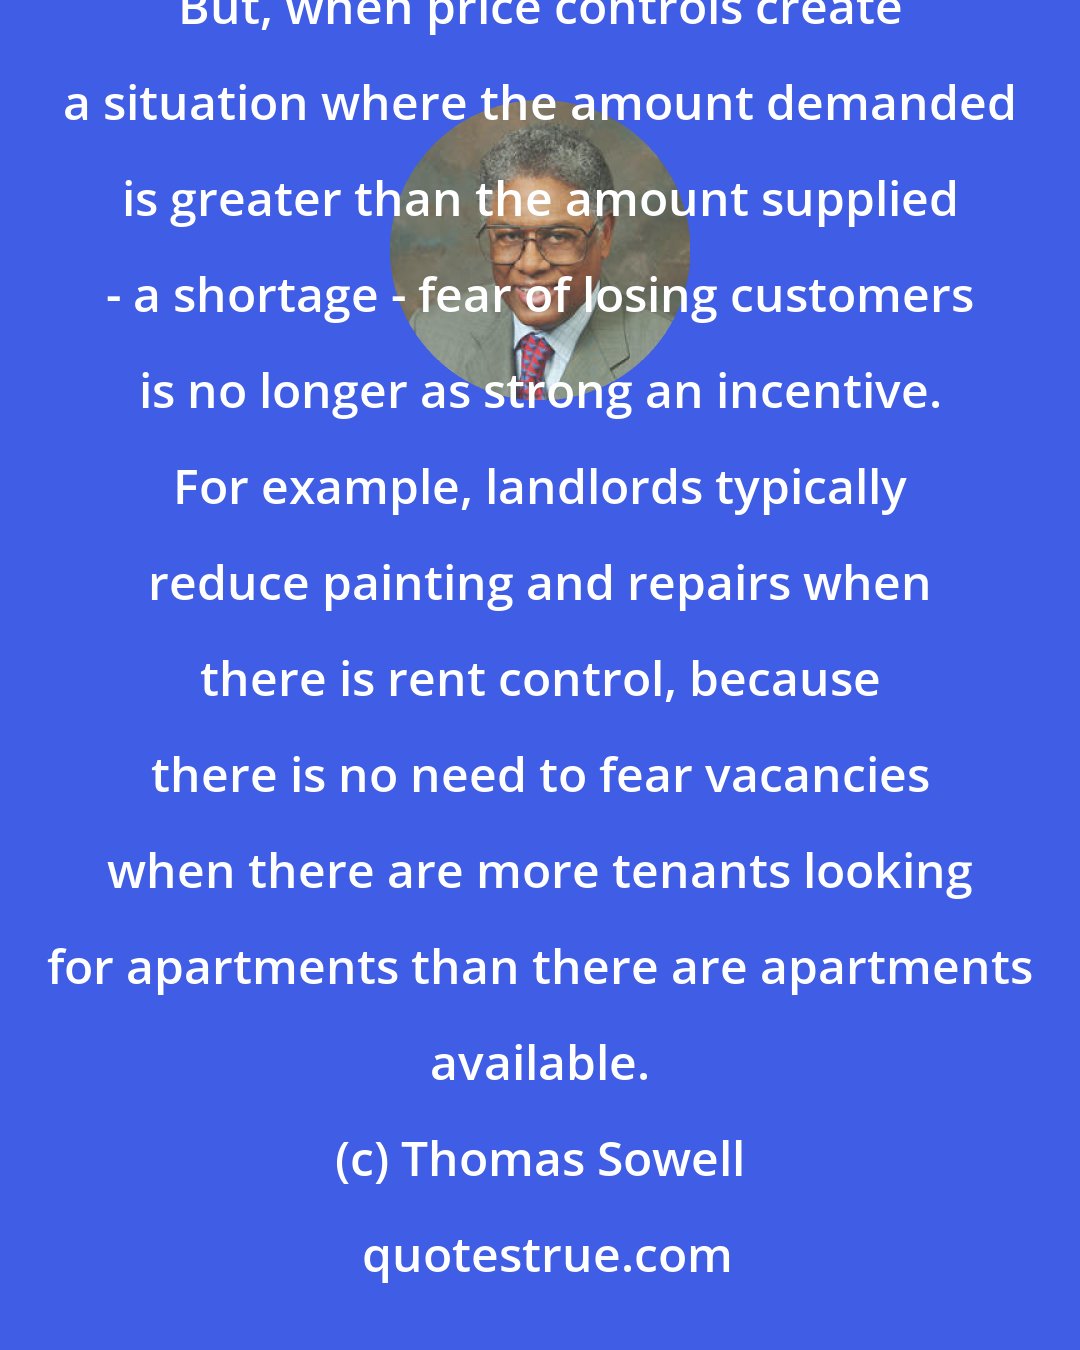 Thomas Sowell: Sellers in general maintain the quality of their products and services for fear of losing customers otherwise. But, when price controls create a situation where the amount demanded is greater than the amount supplied - a shortage - fear of losing customers is no longer as strong an incentive. For example, landlords typically reduce painting and repairs when there is rent control, because there is no need to fear vacancies when there are more tenants looking for apartments than there are apartments available.